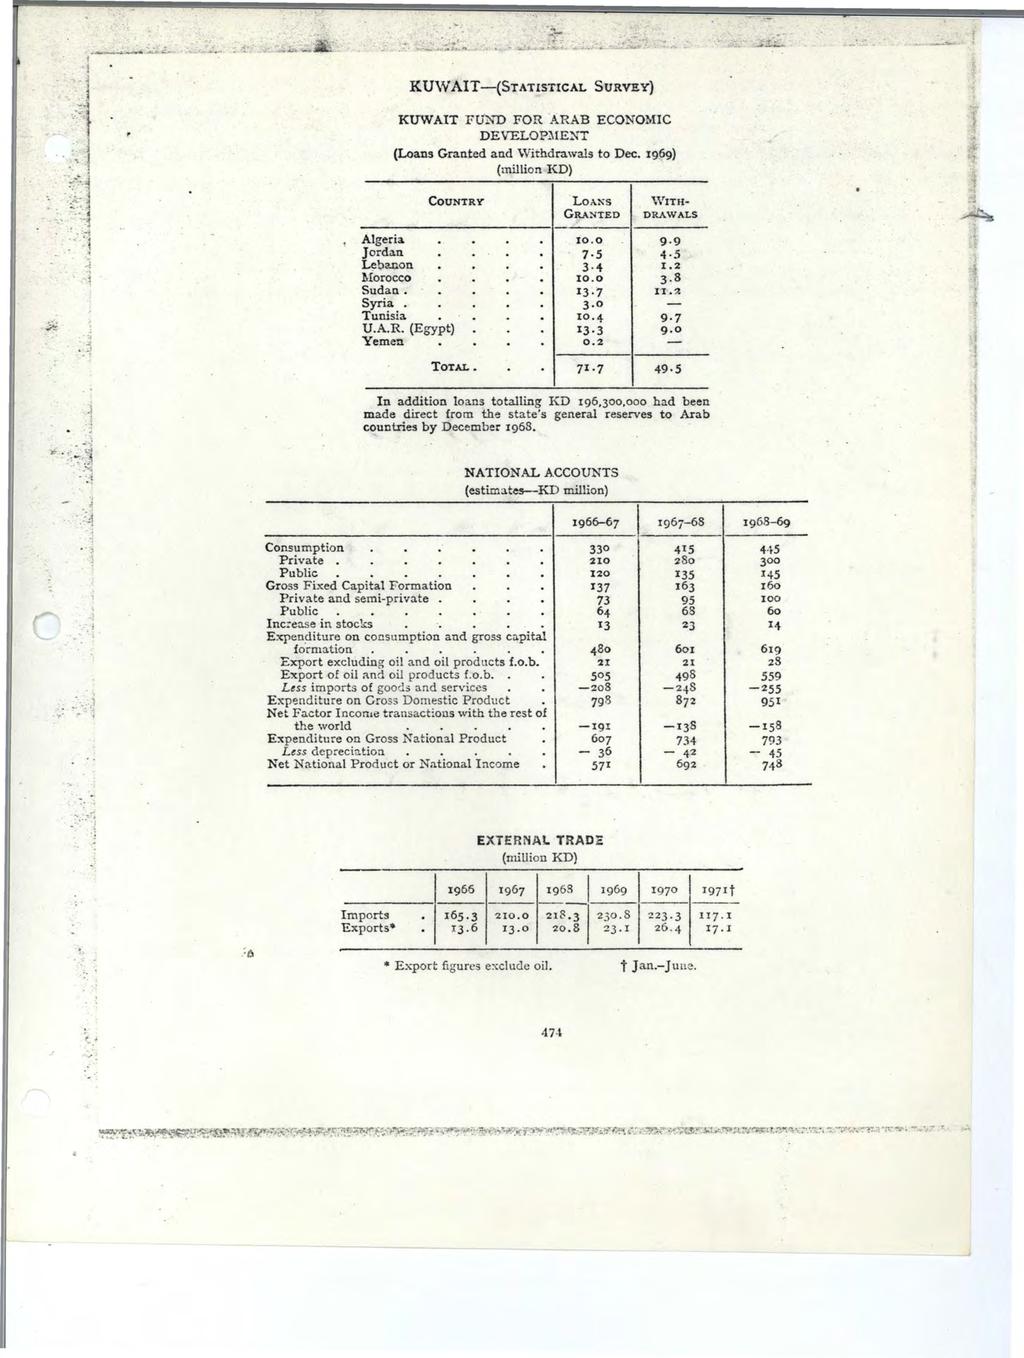 ~---~! KUWAIT-(STATISTICAL SURVEY) ',.... ;~;J.~.' - KUWAIT FU~-o FOR.ARAB ECONOMIC DEVELOP~\IENT (Loans Granted and withdrawals to Dec. 1969) (million KD) CouNTRY LOAXS '.